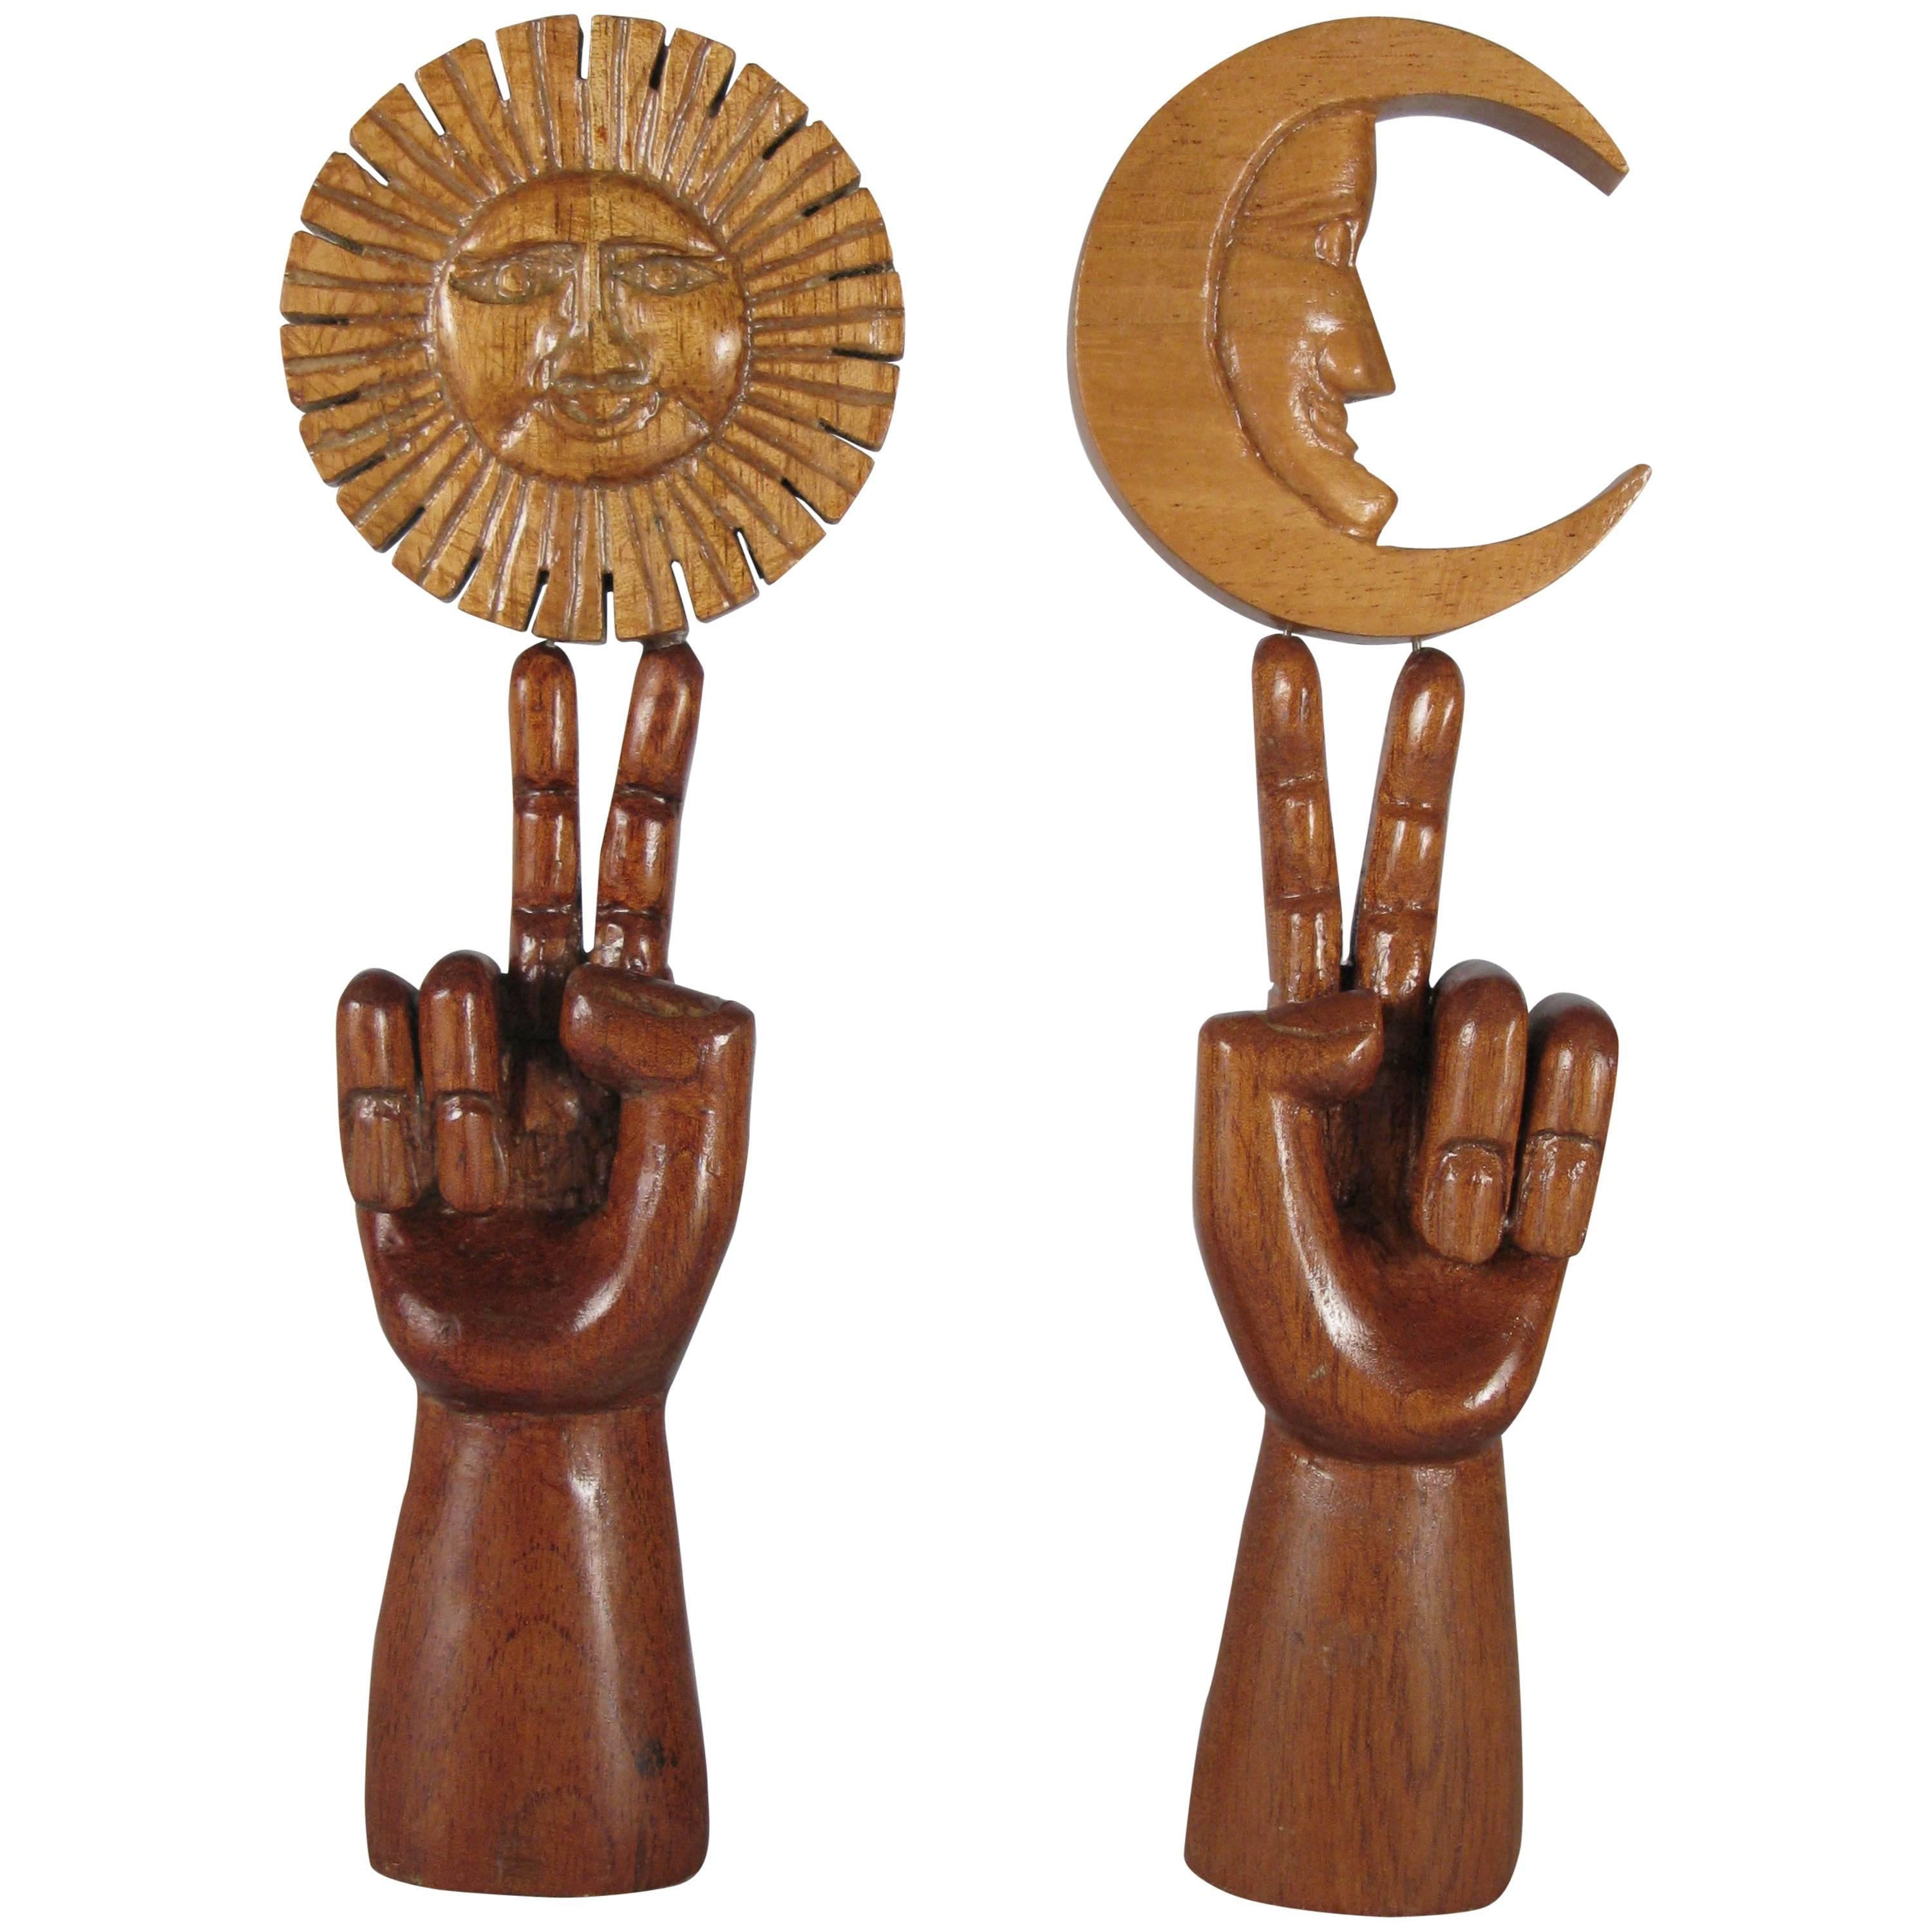 Pair of Lacquered Wood Sculptures "Victory, " Pedro Friedeberg, Mexico